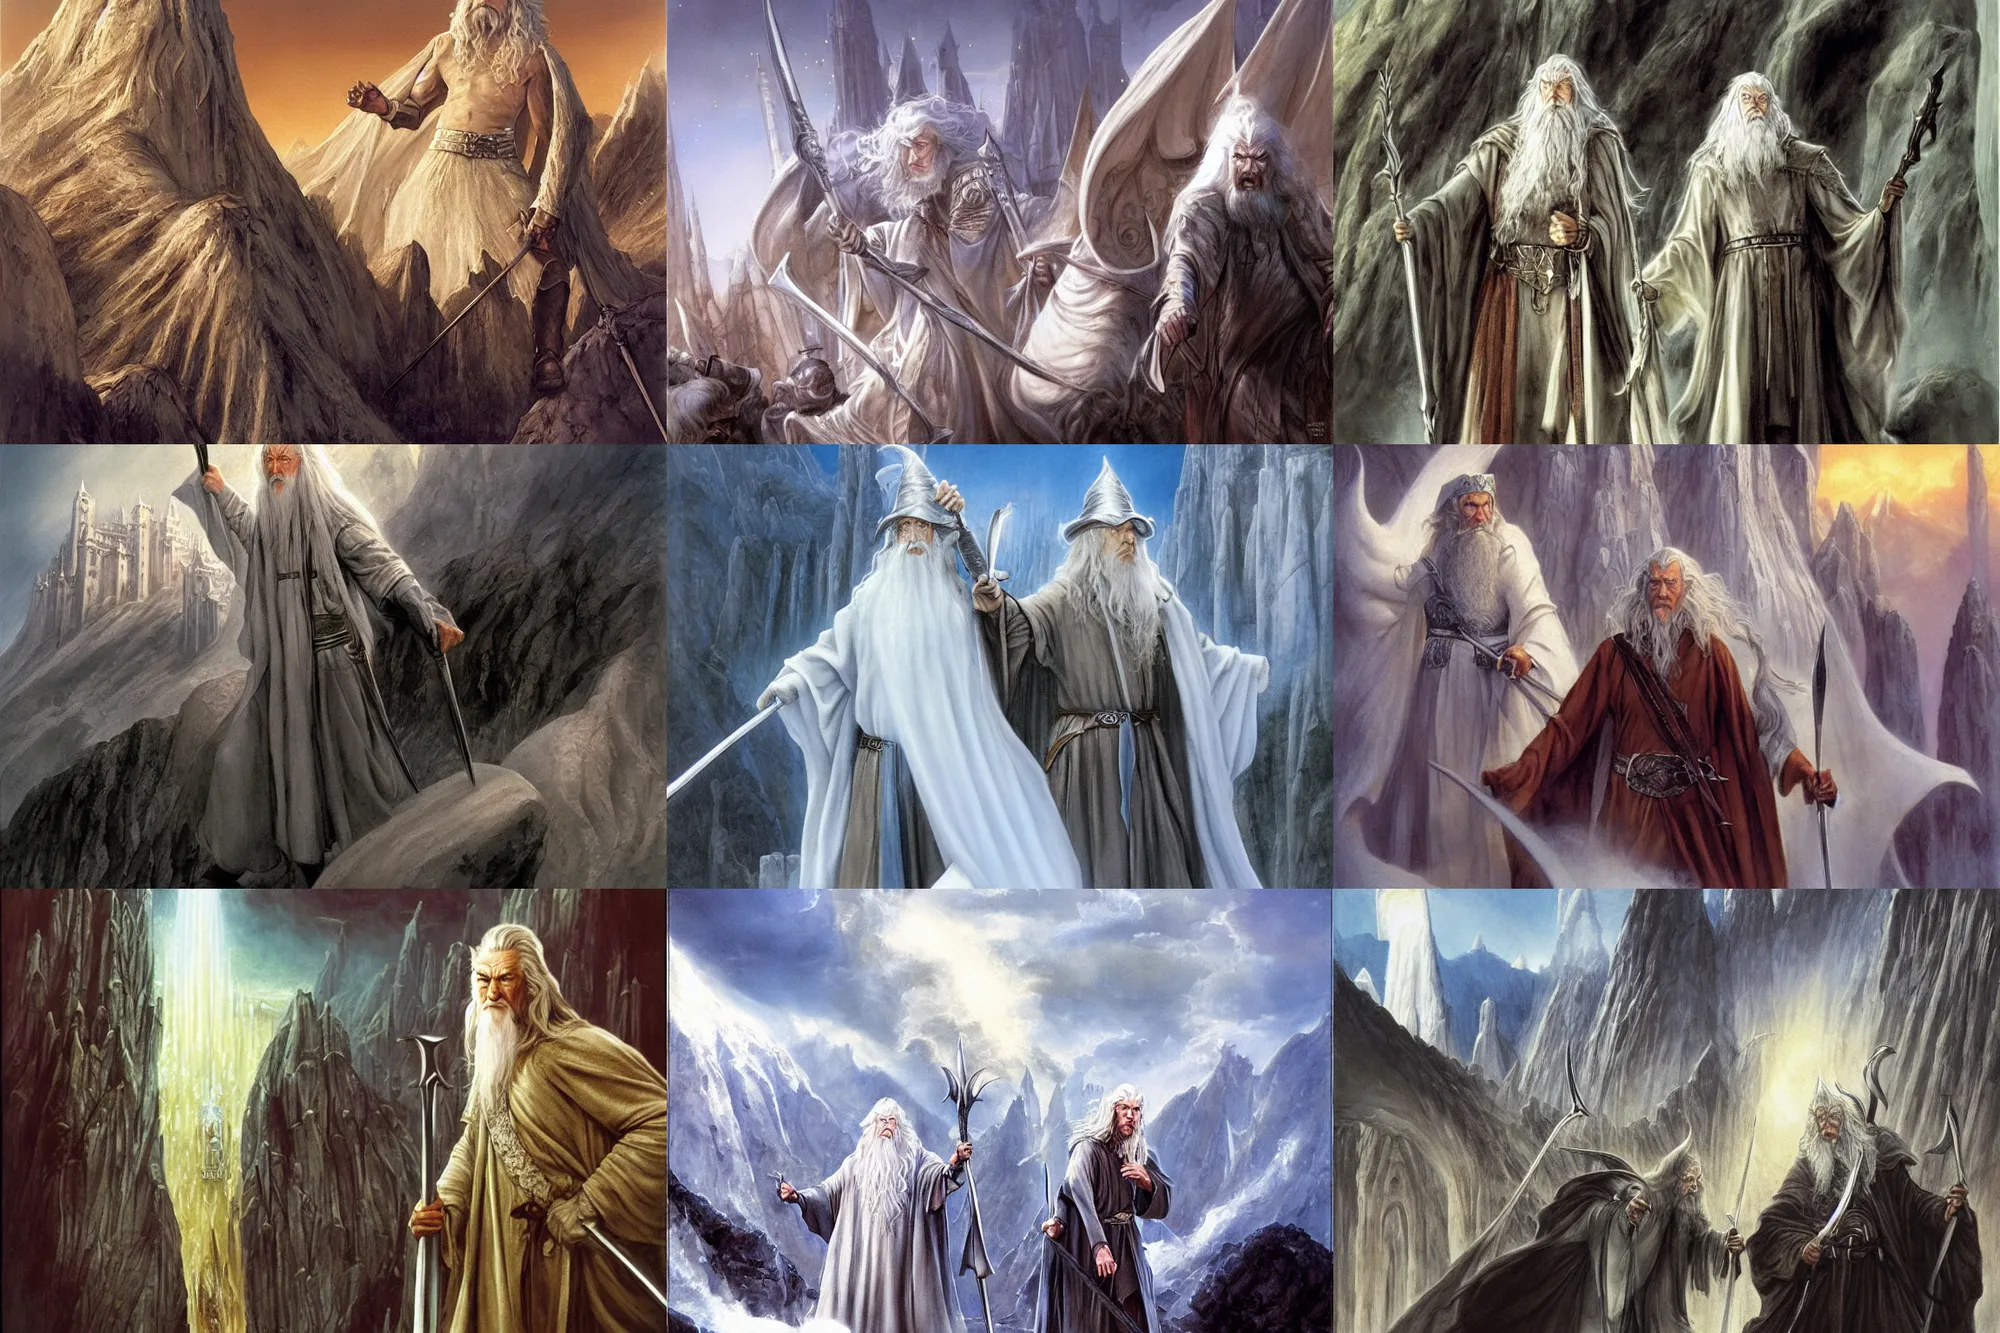 Gandalf, Flatdesign, landscape, The Lord of the Rings, Minas